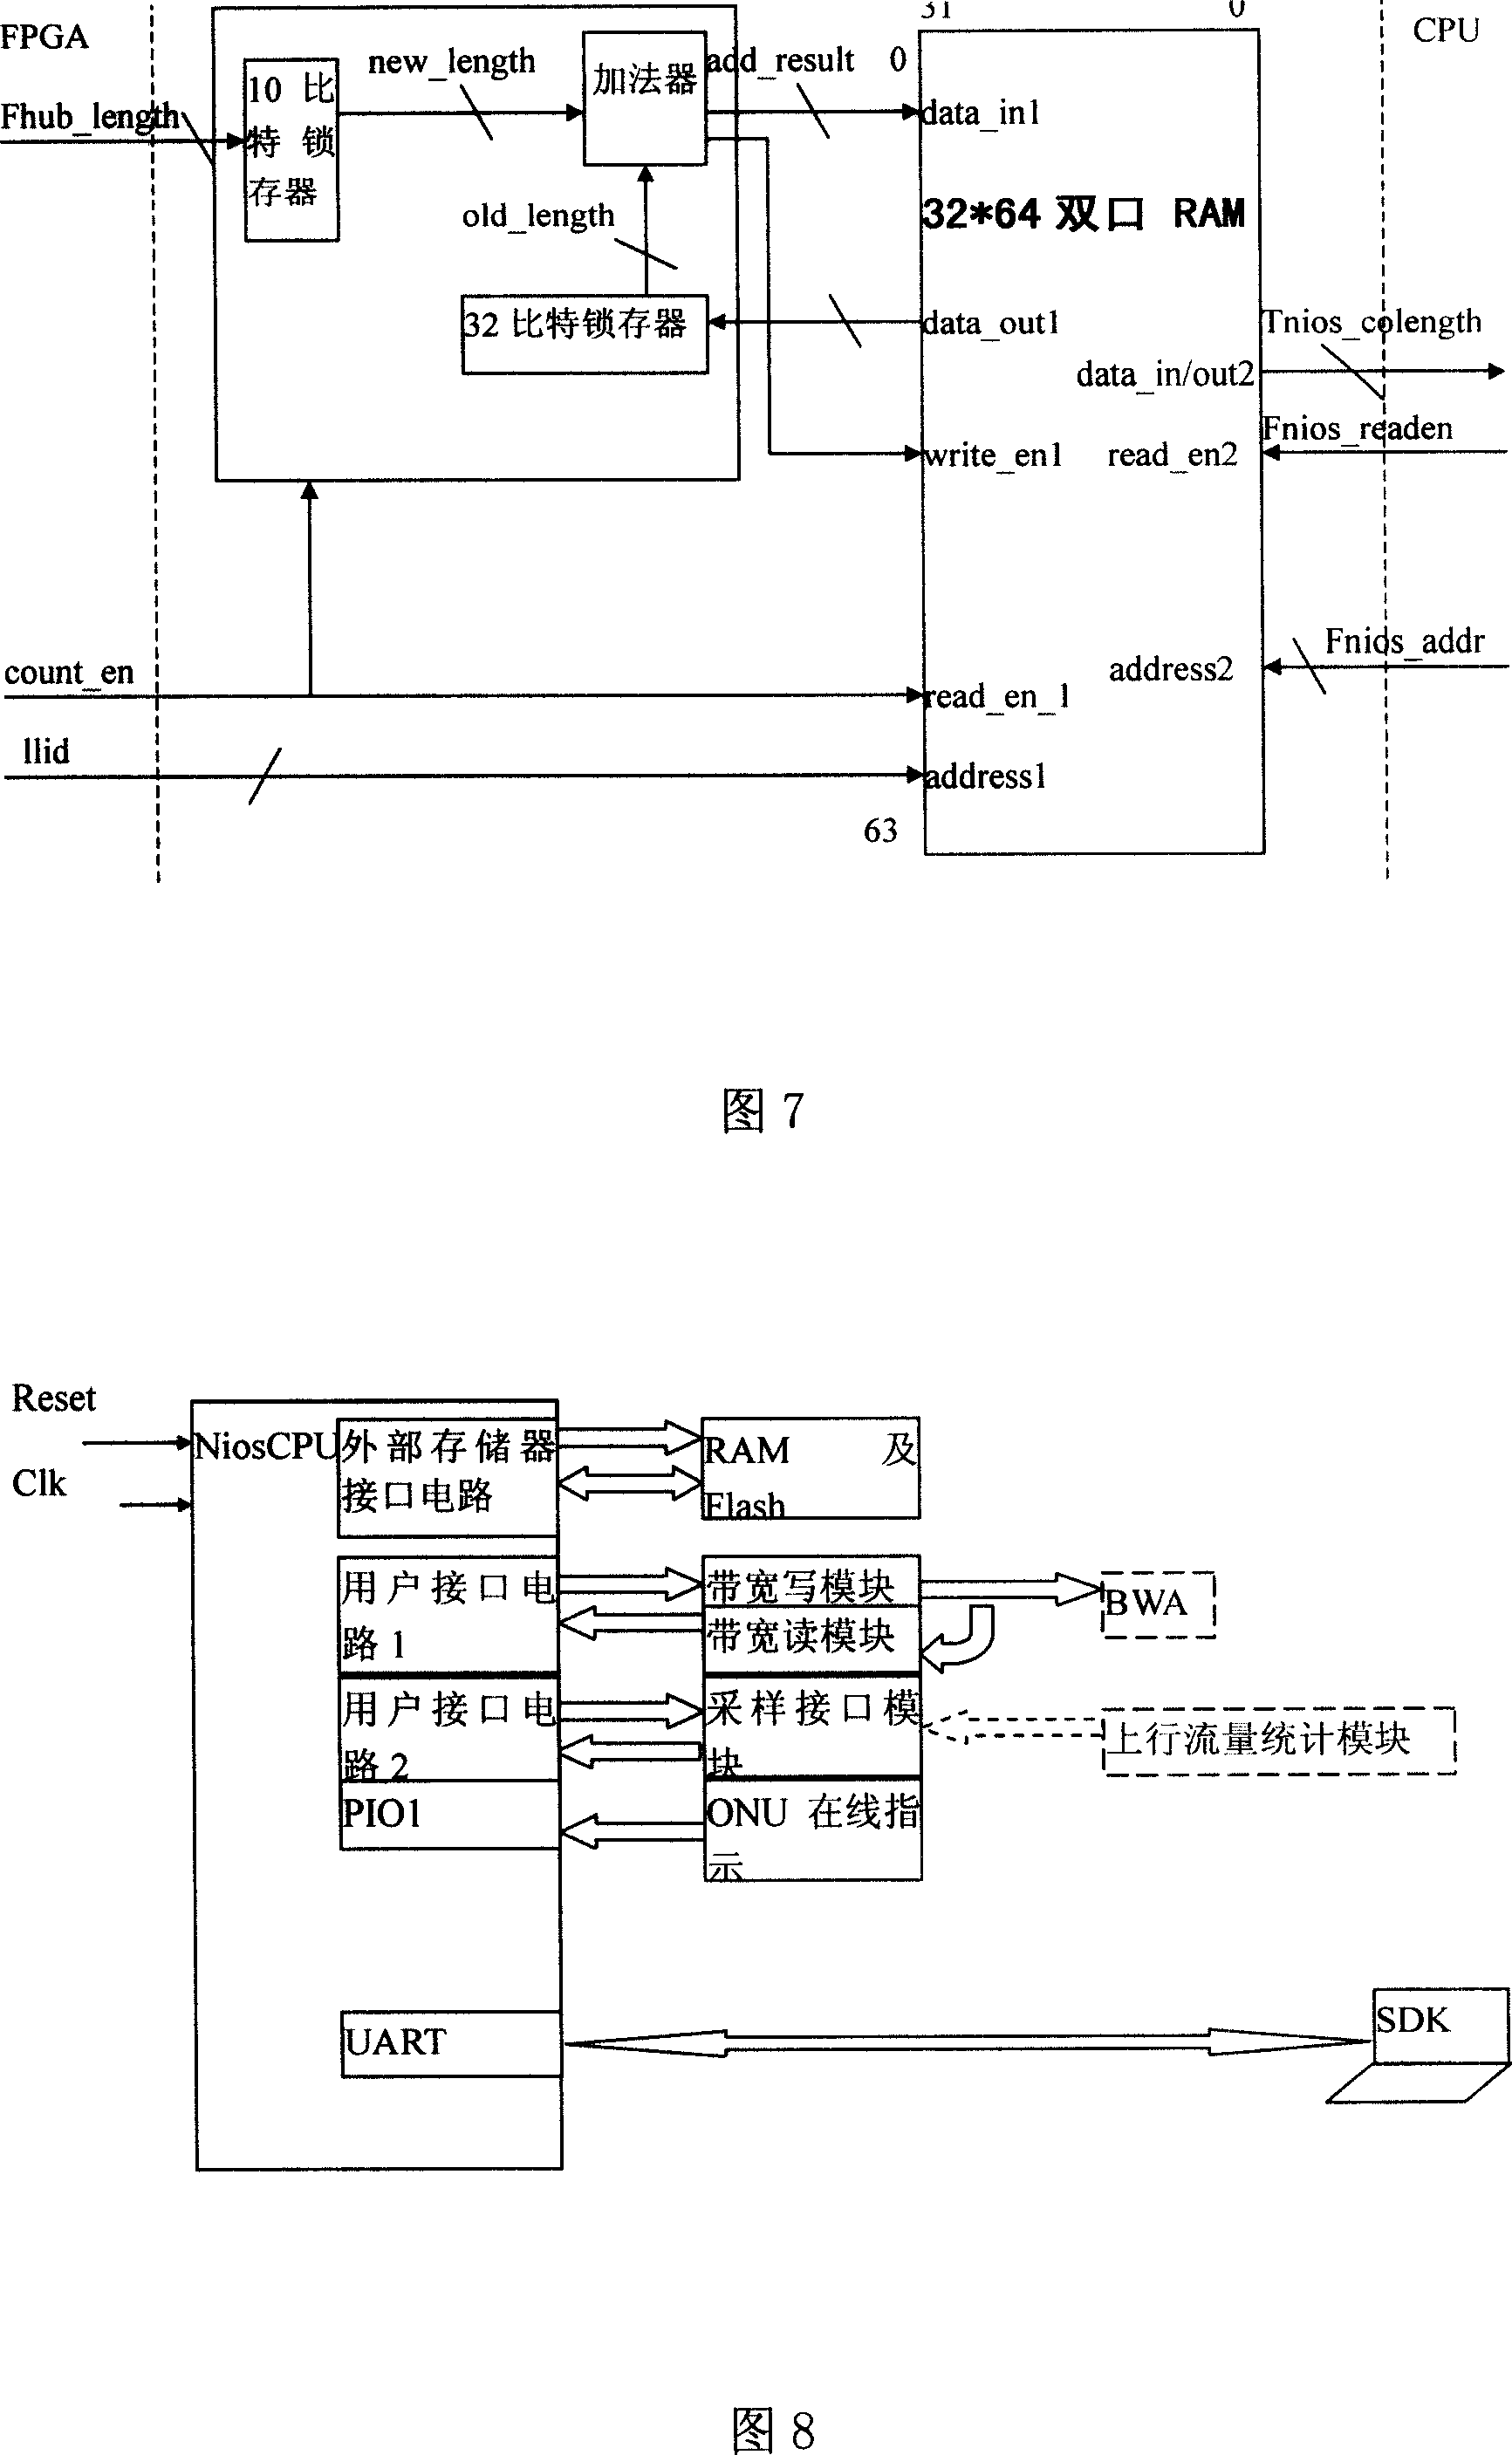 Method and device for dynamically distributing bandwith based on Ethernet passive light network up-link